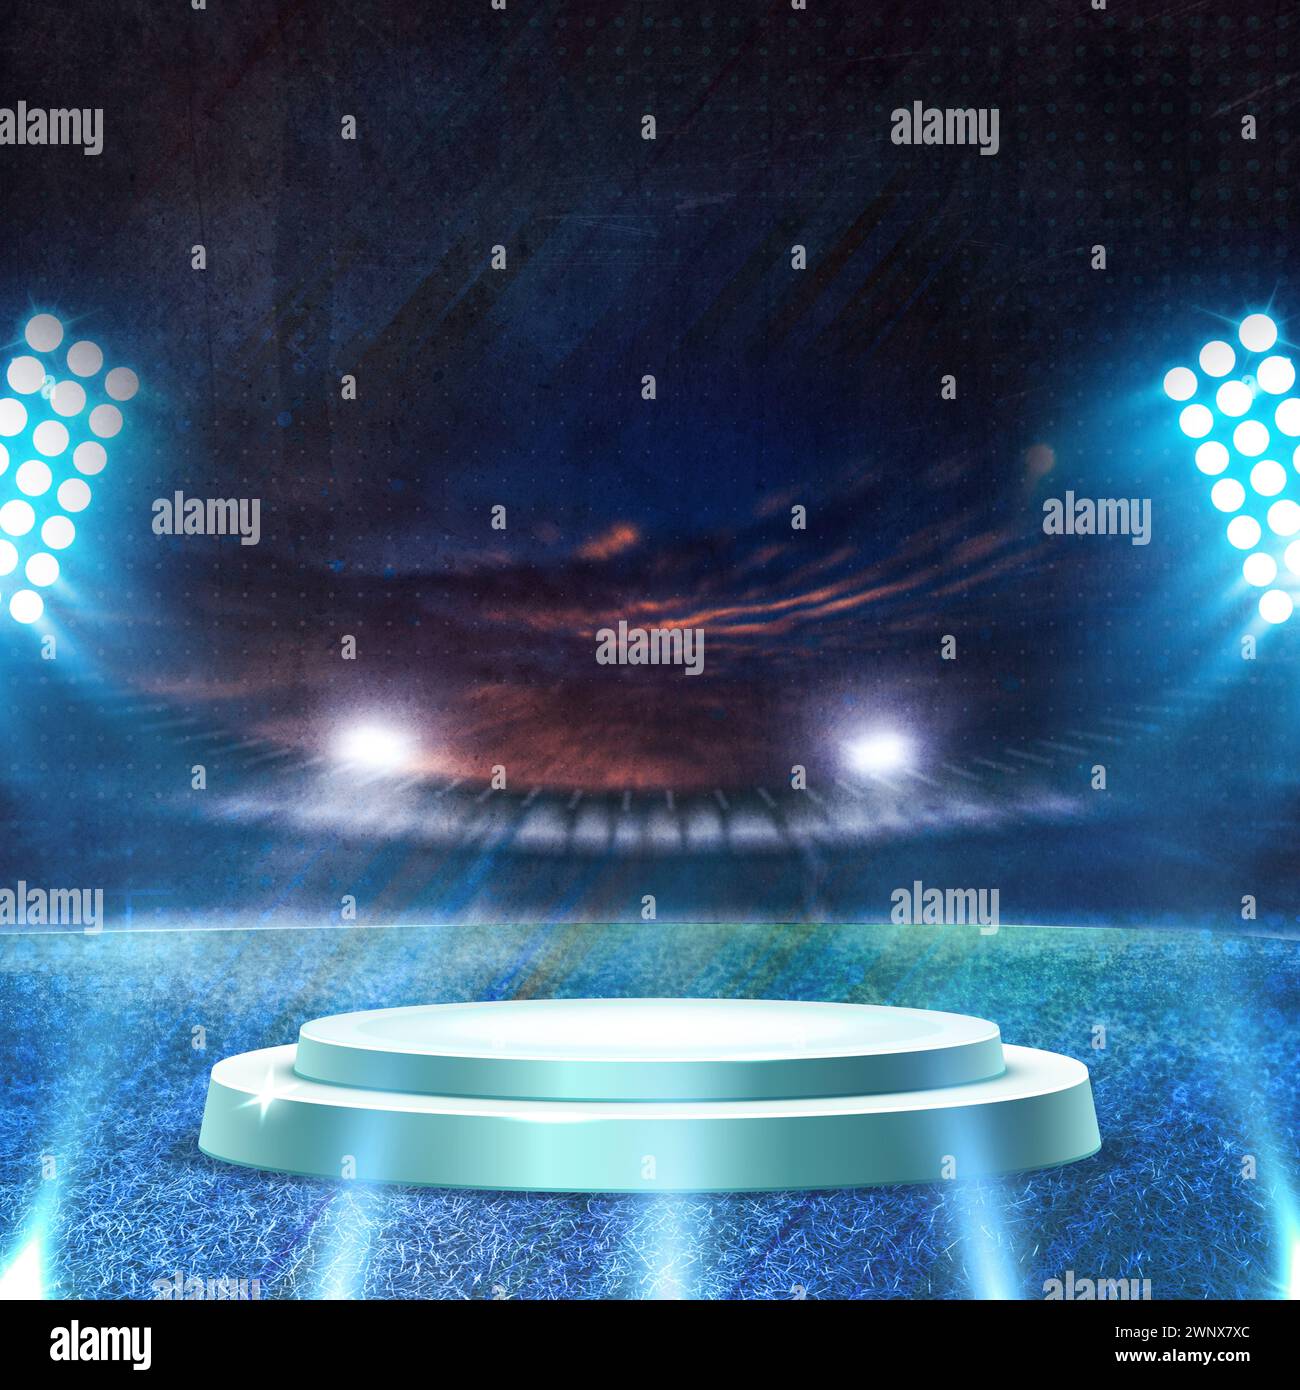 Cricket template for social media posts. Cricket background with stadium lights, gallery and field. Readymade background for sports social media. vs Stock Photo